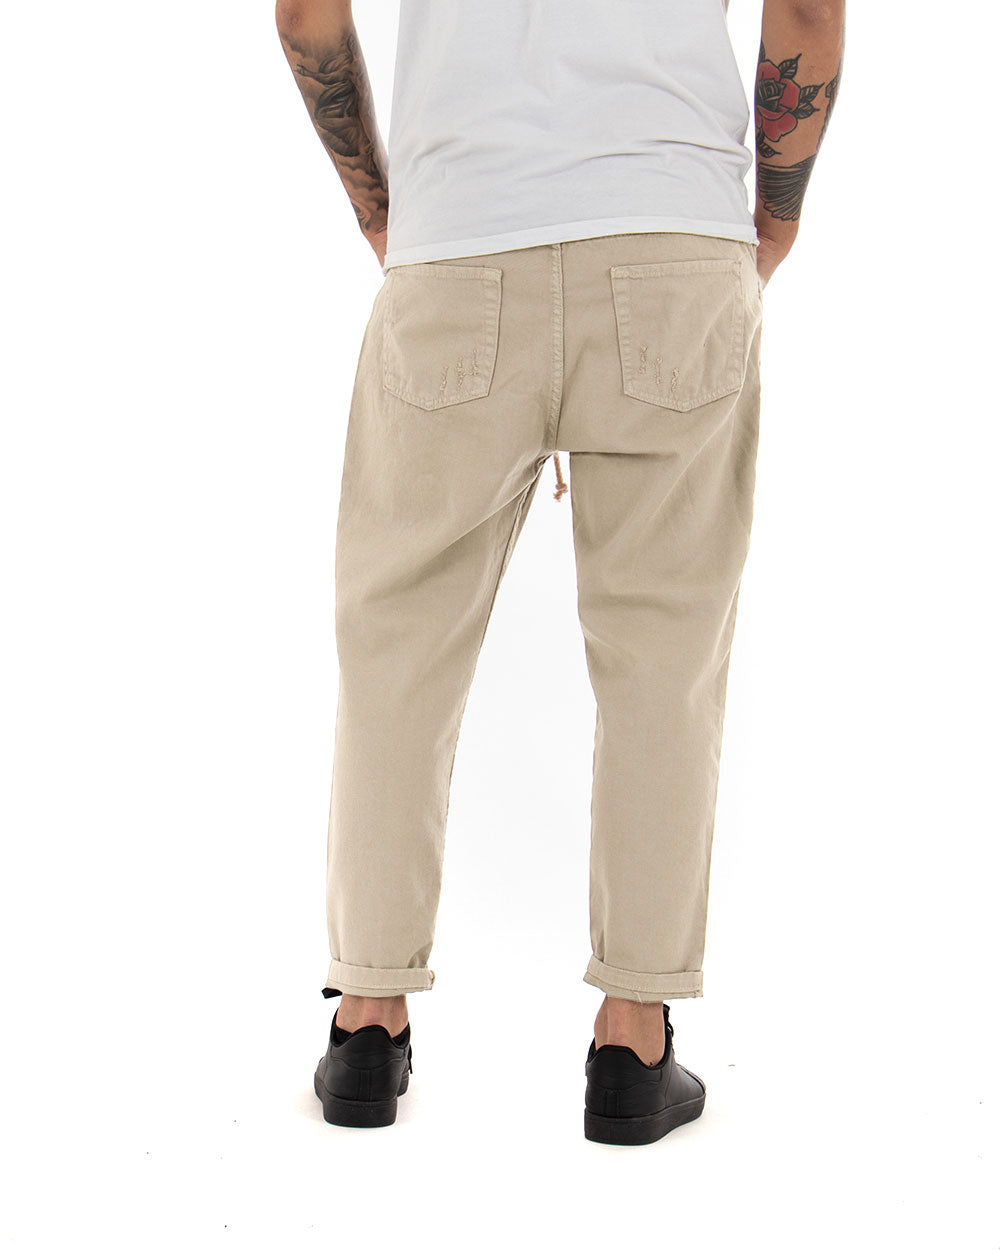 Men's Jeans Trousers Regular Fit Beige Bull Trousers With Casual Rips GIOSAL-P4096A